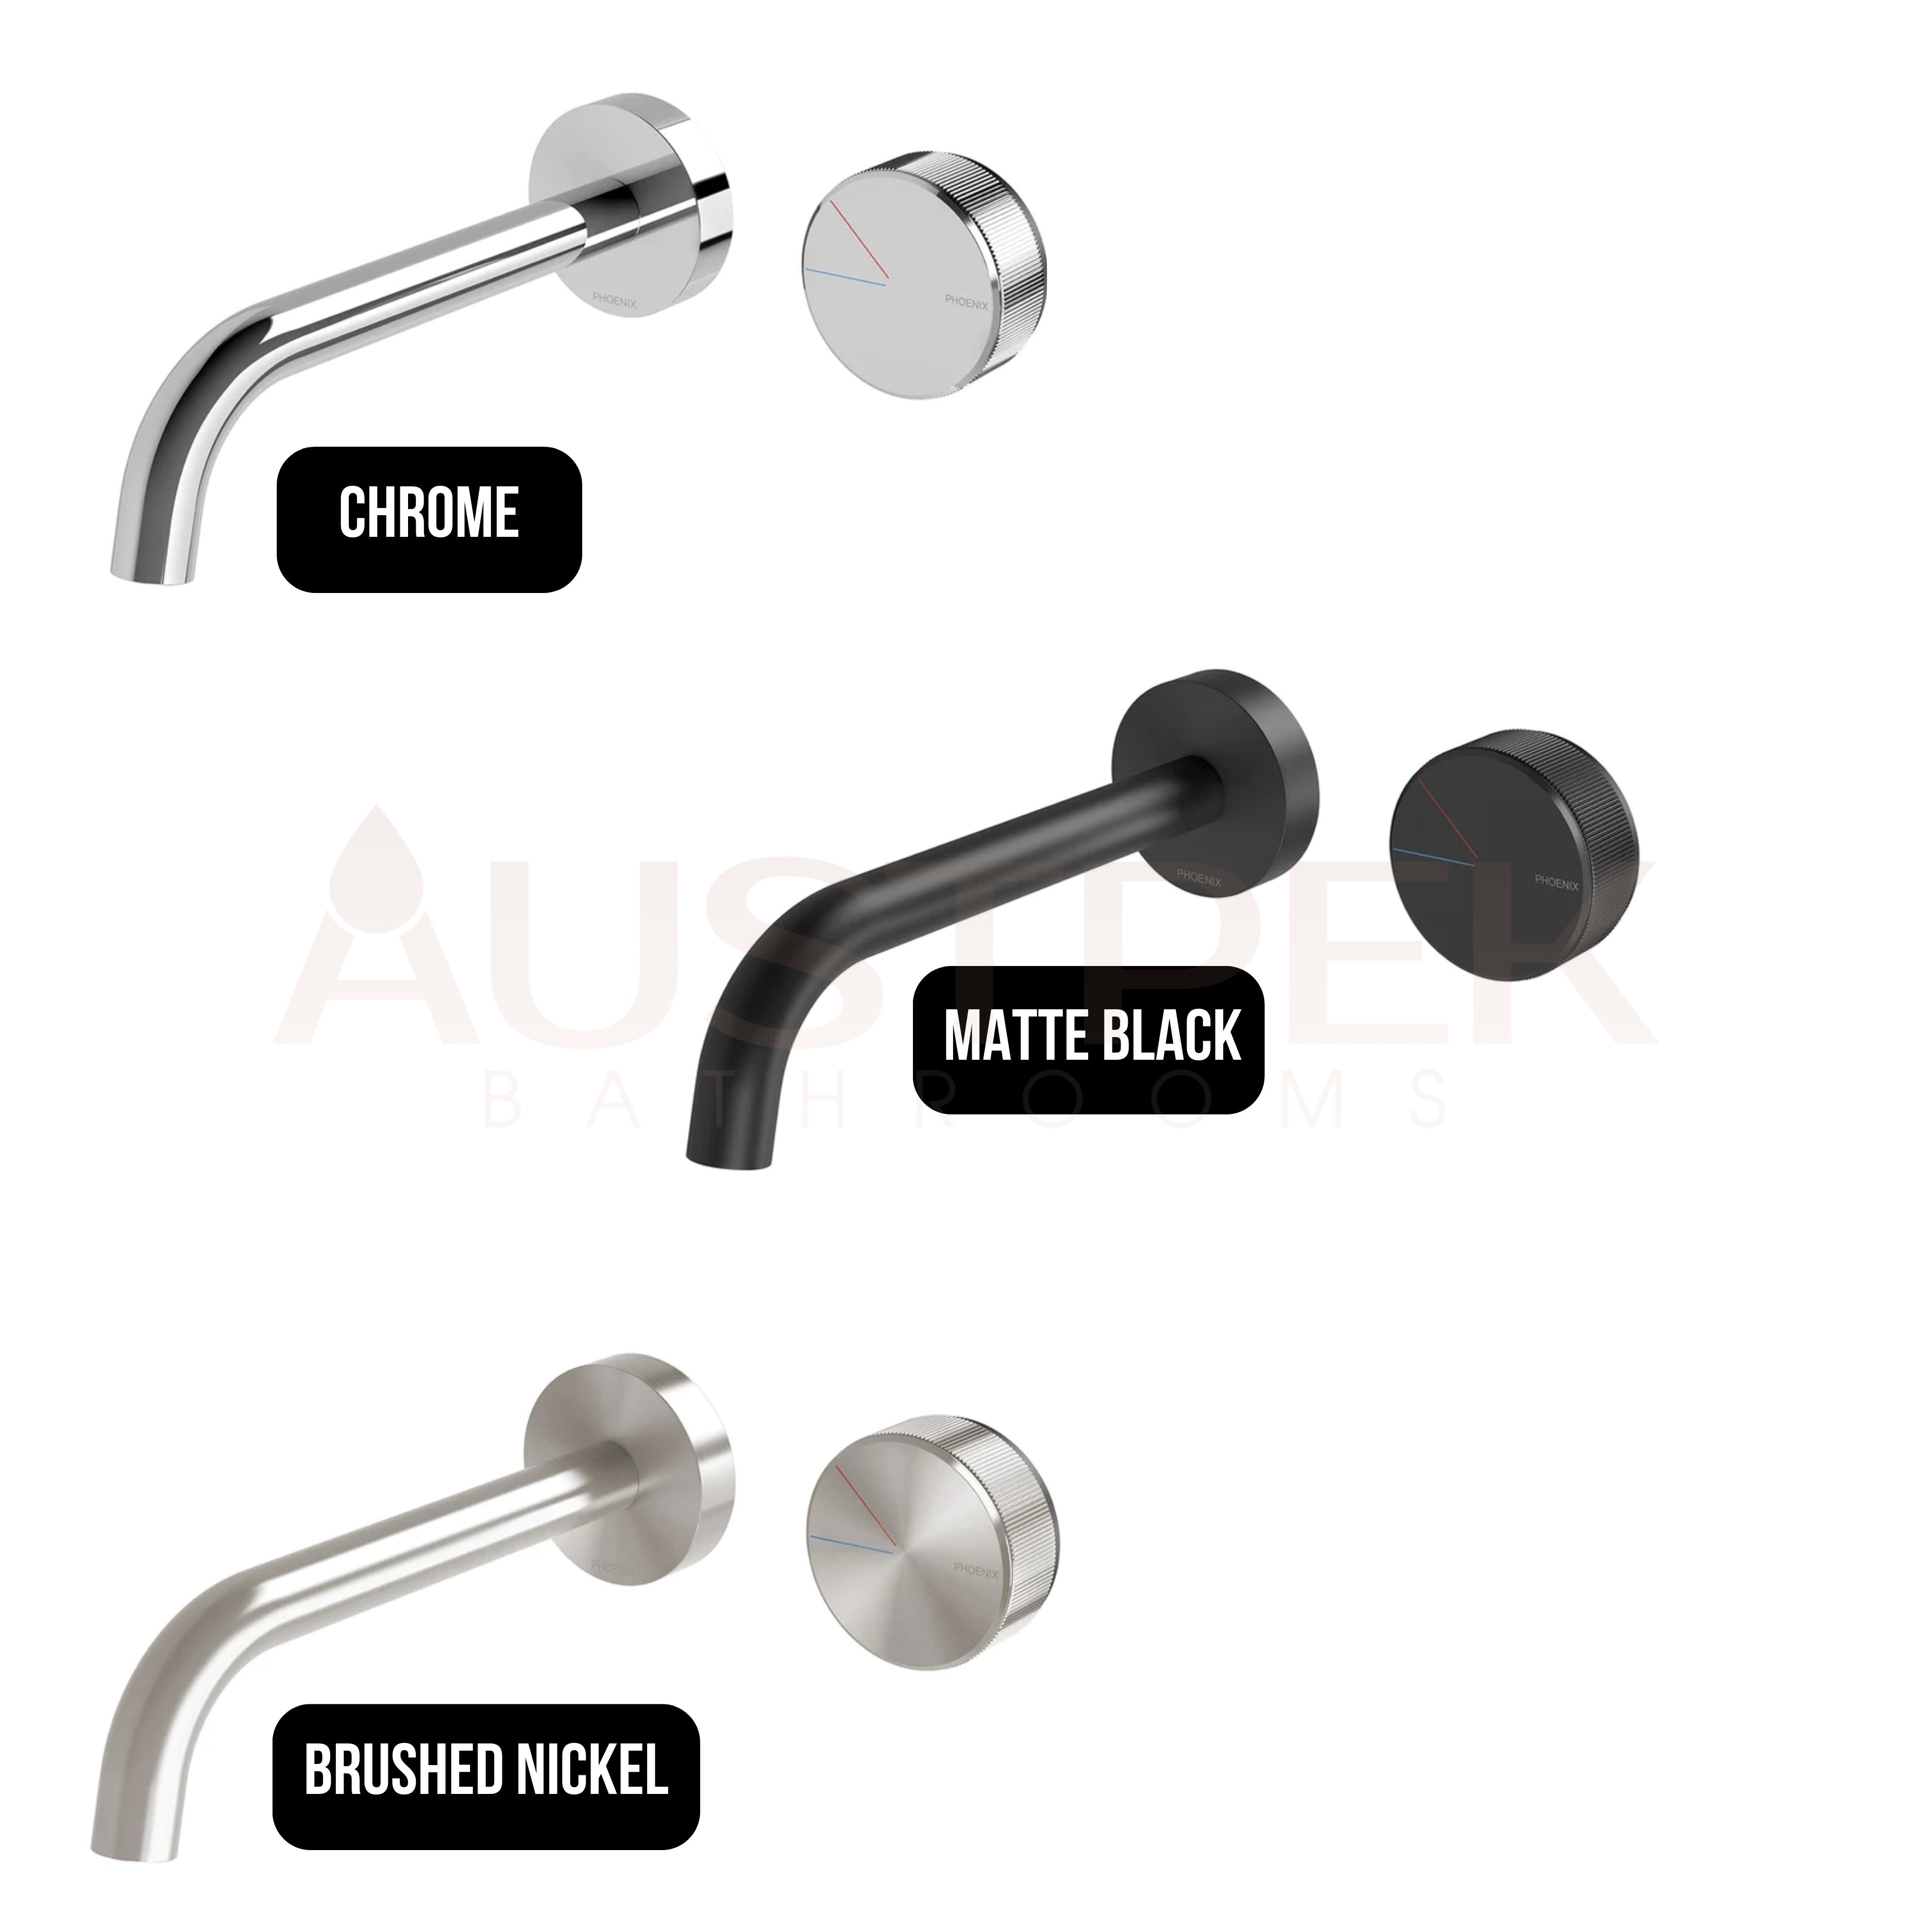 PHOENIX AXIA WALL BASIN / BATH CURVED OUTLET MIXER SET 180MM CHROME